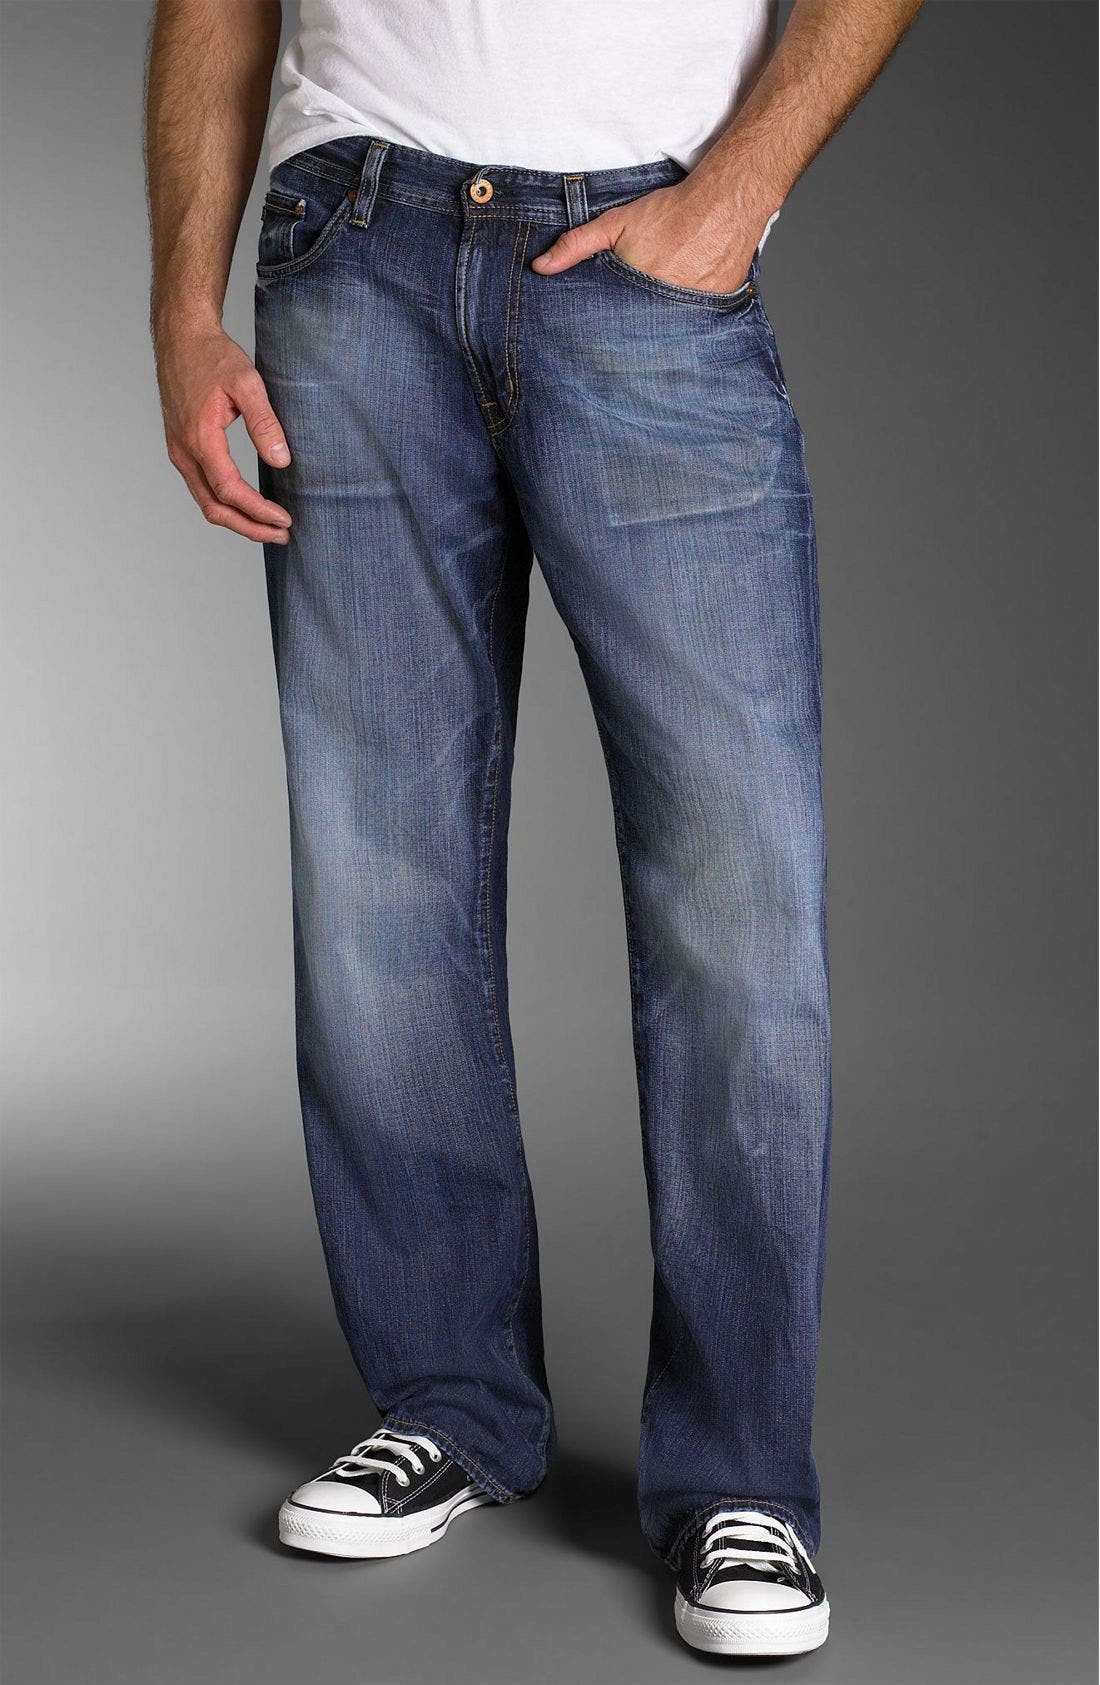 adriano goldschmied jeans mens